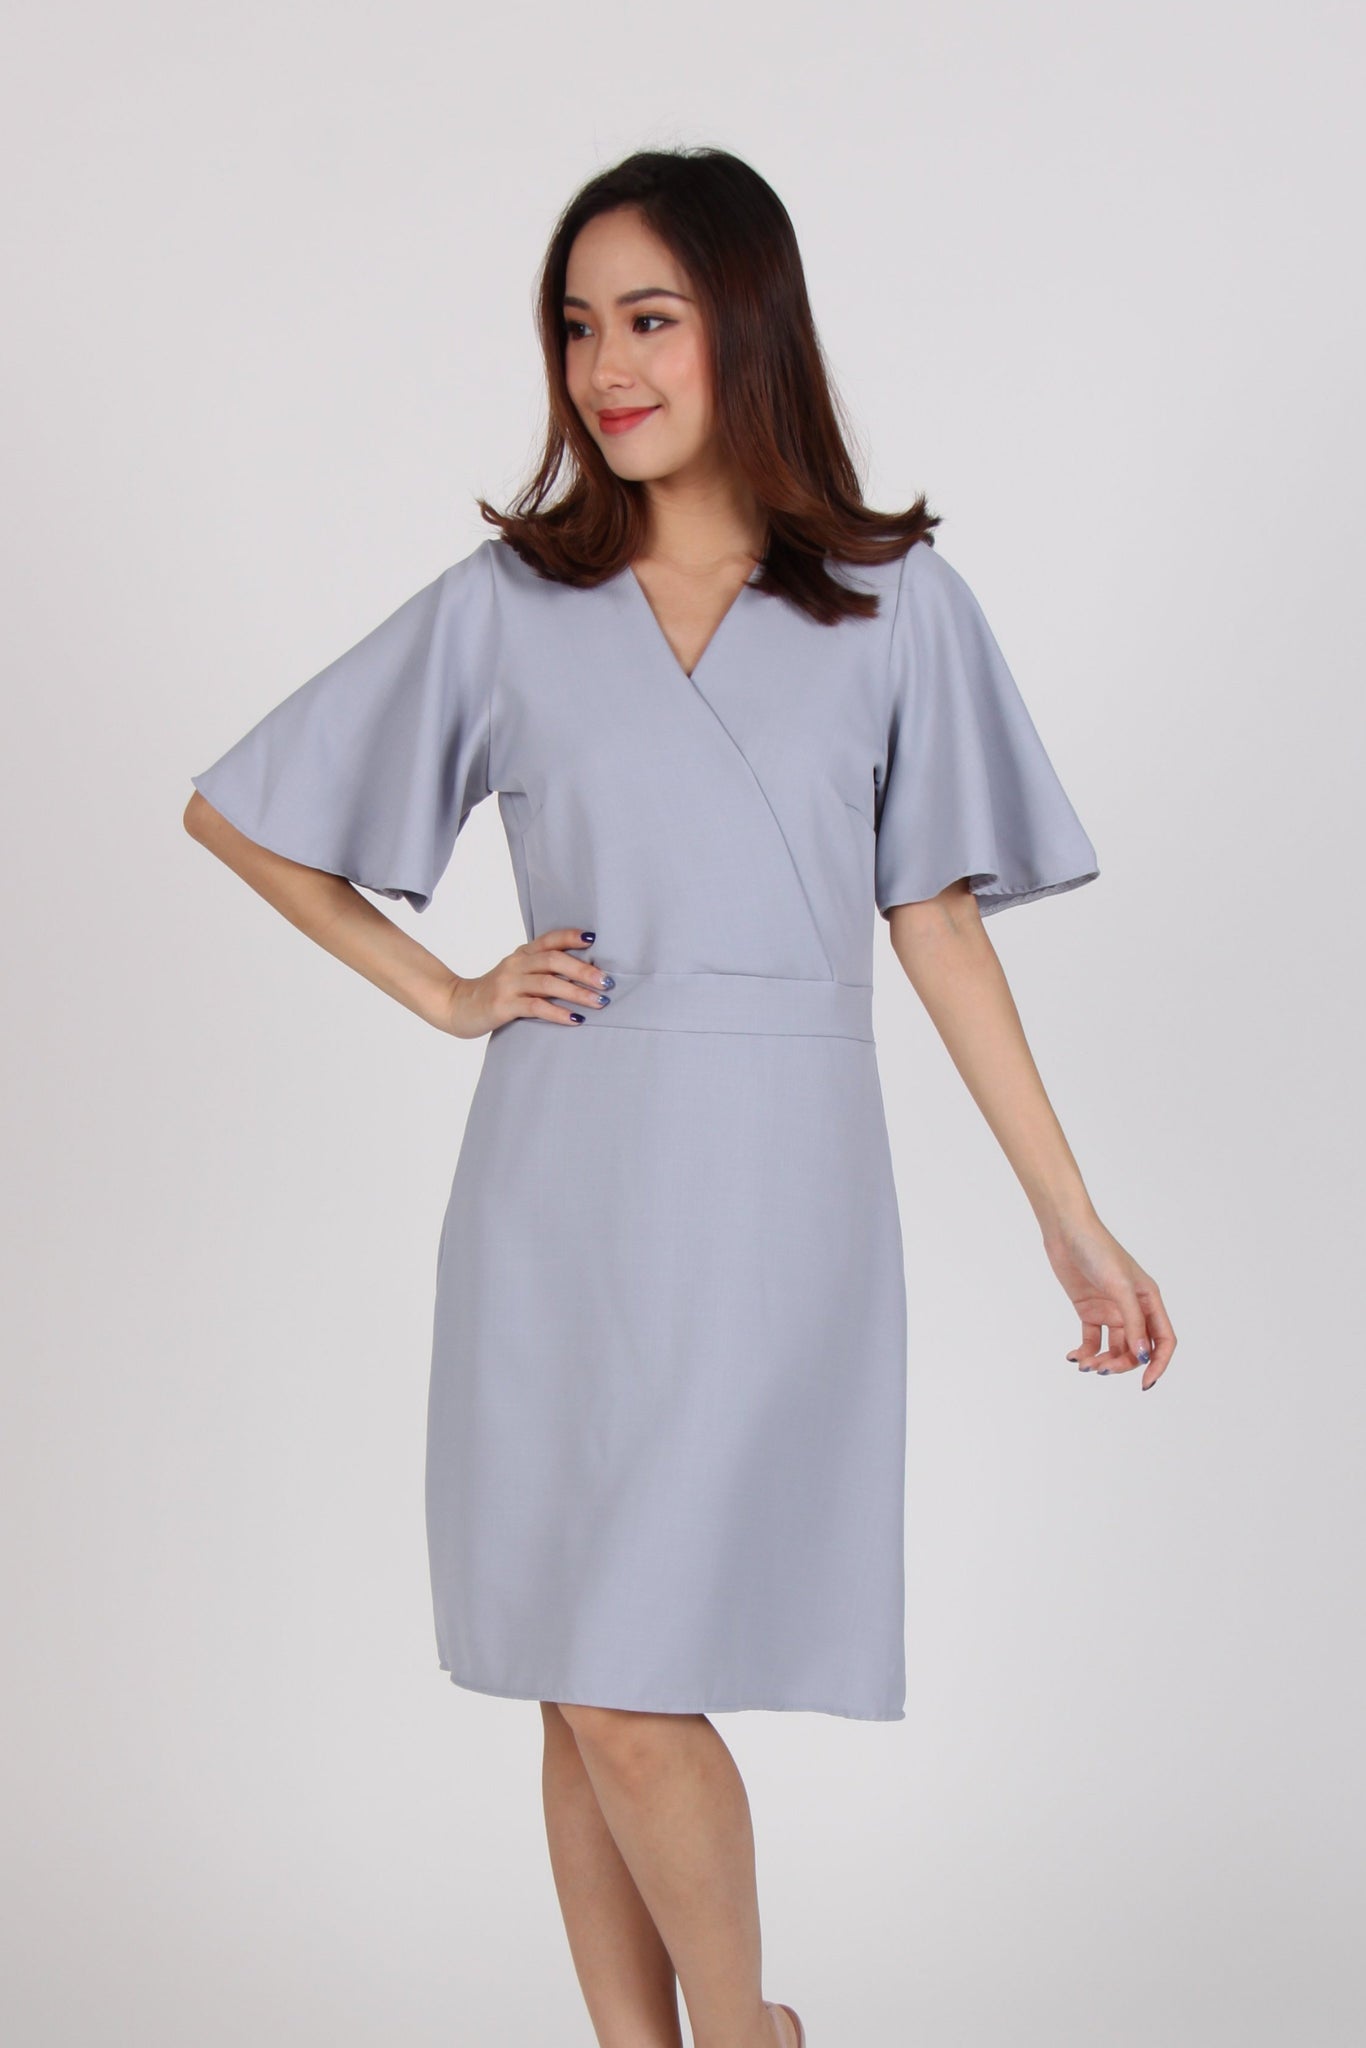 Bell Sleeves Wrap Front Dress in Light Blue